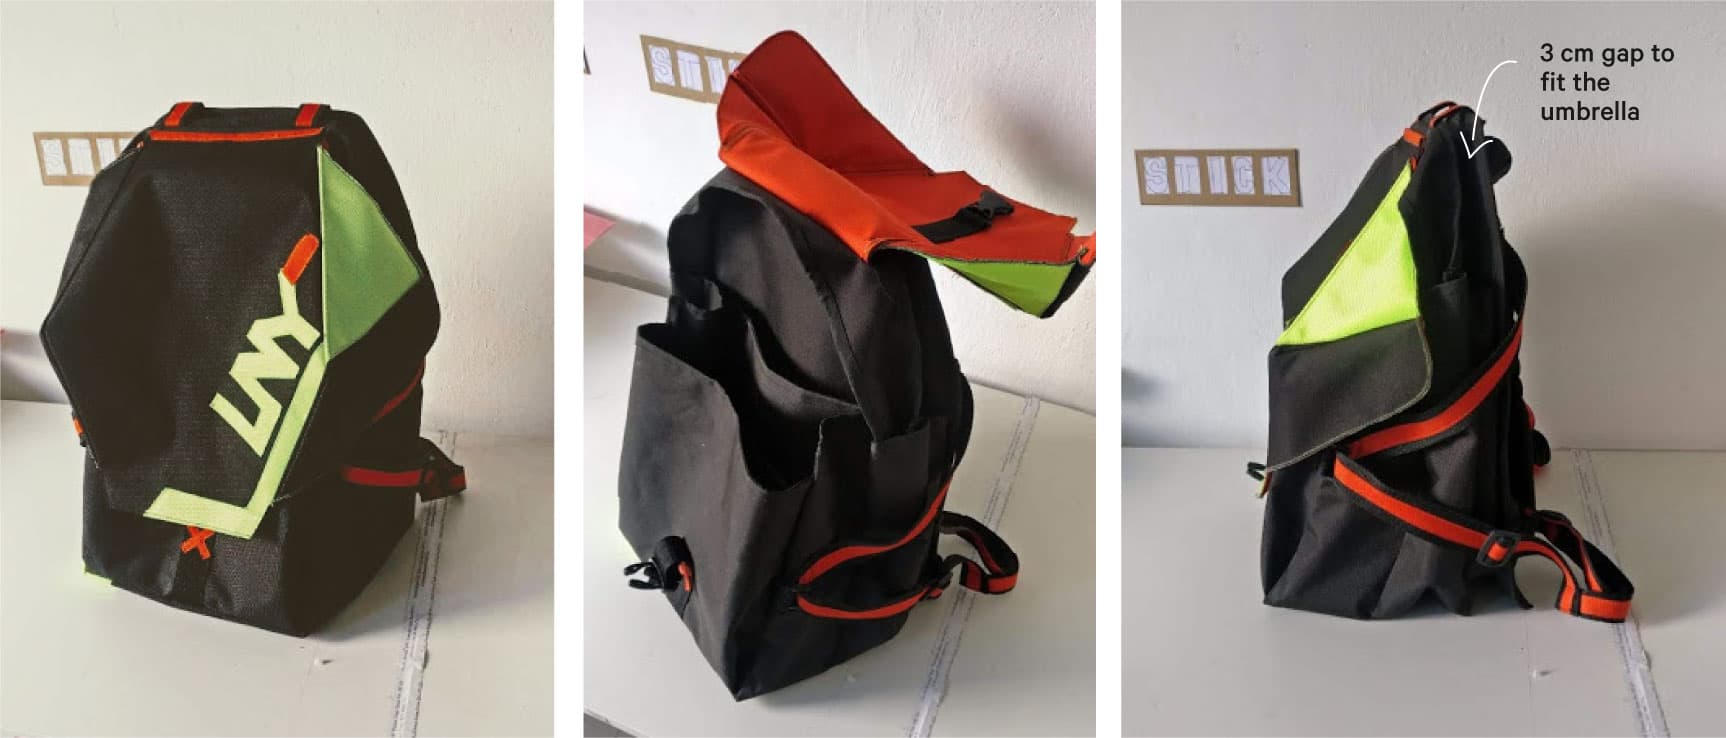 Prototype of the bag made with real fabric.